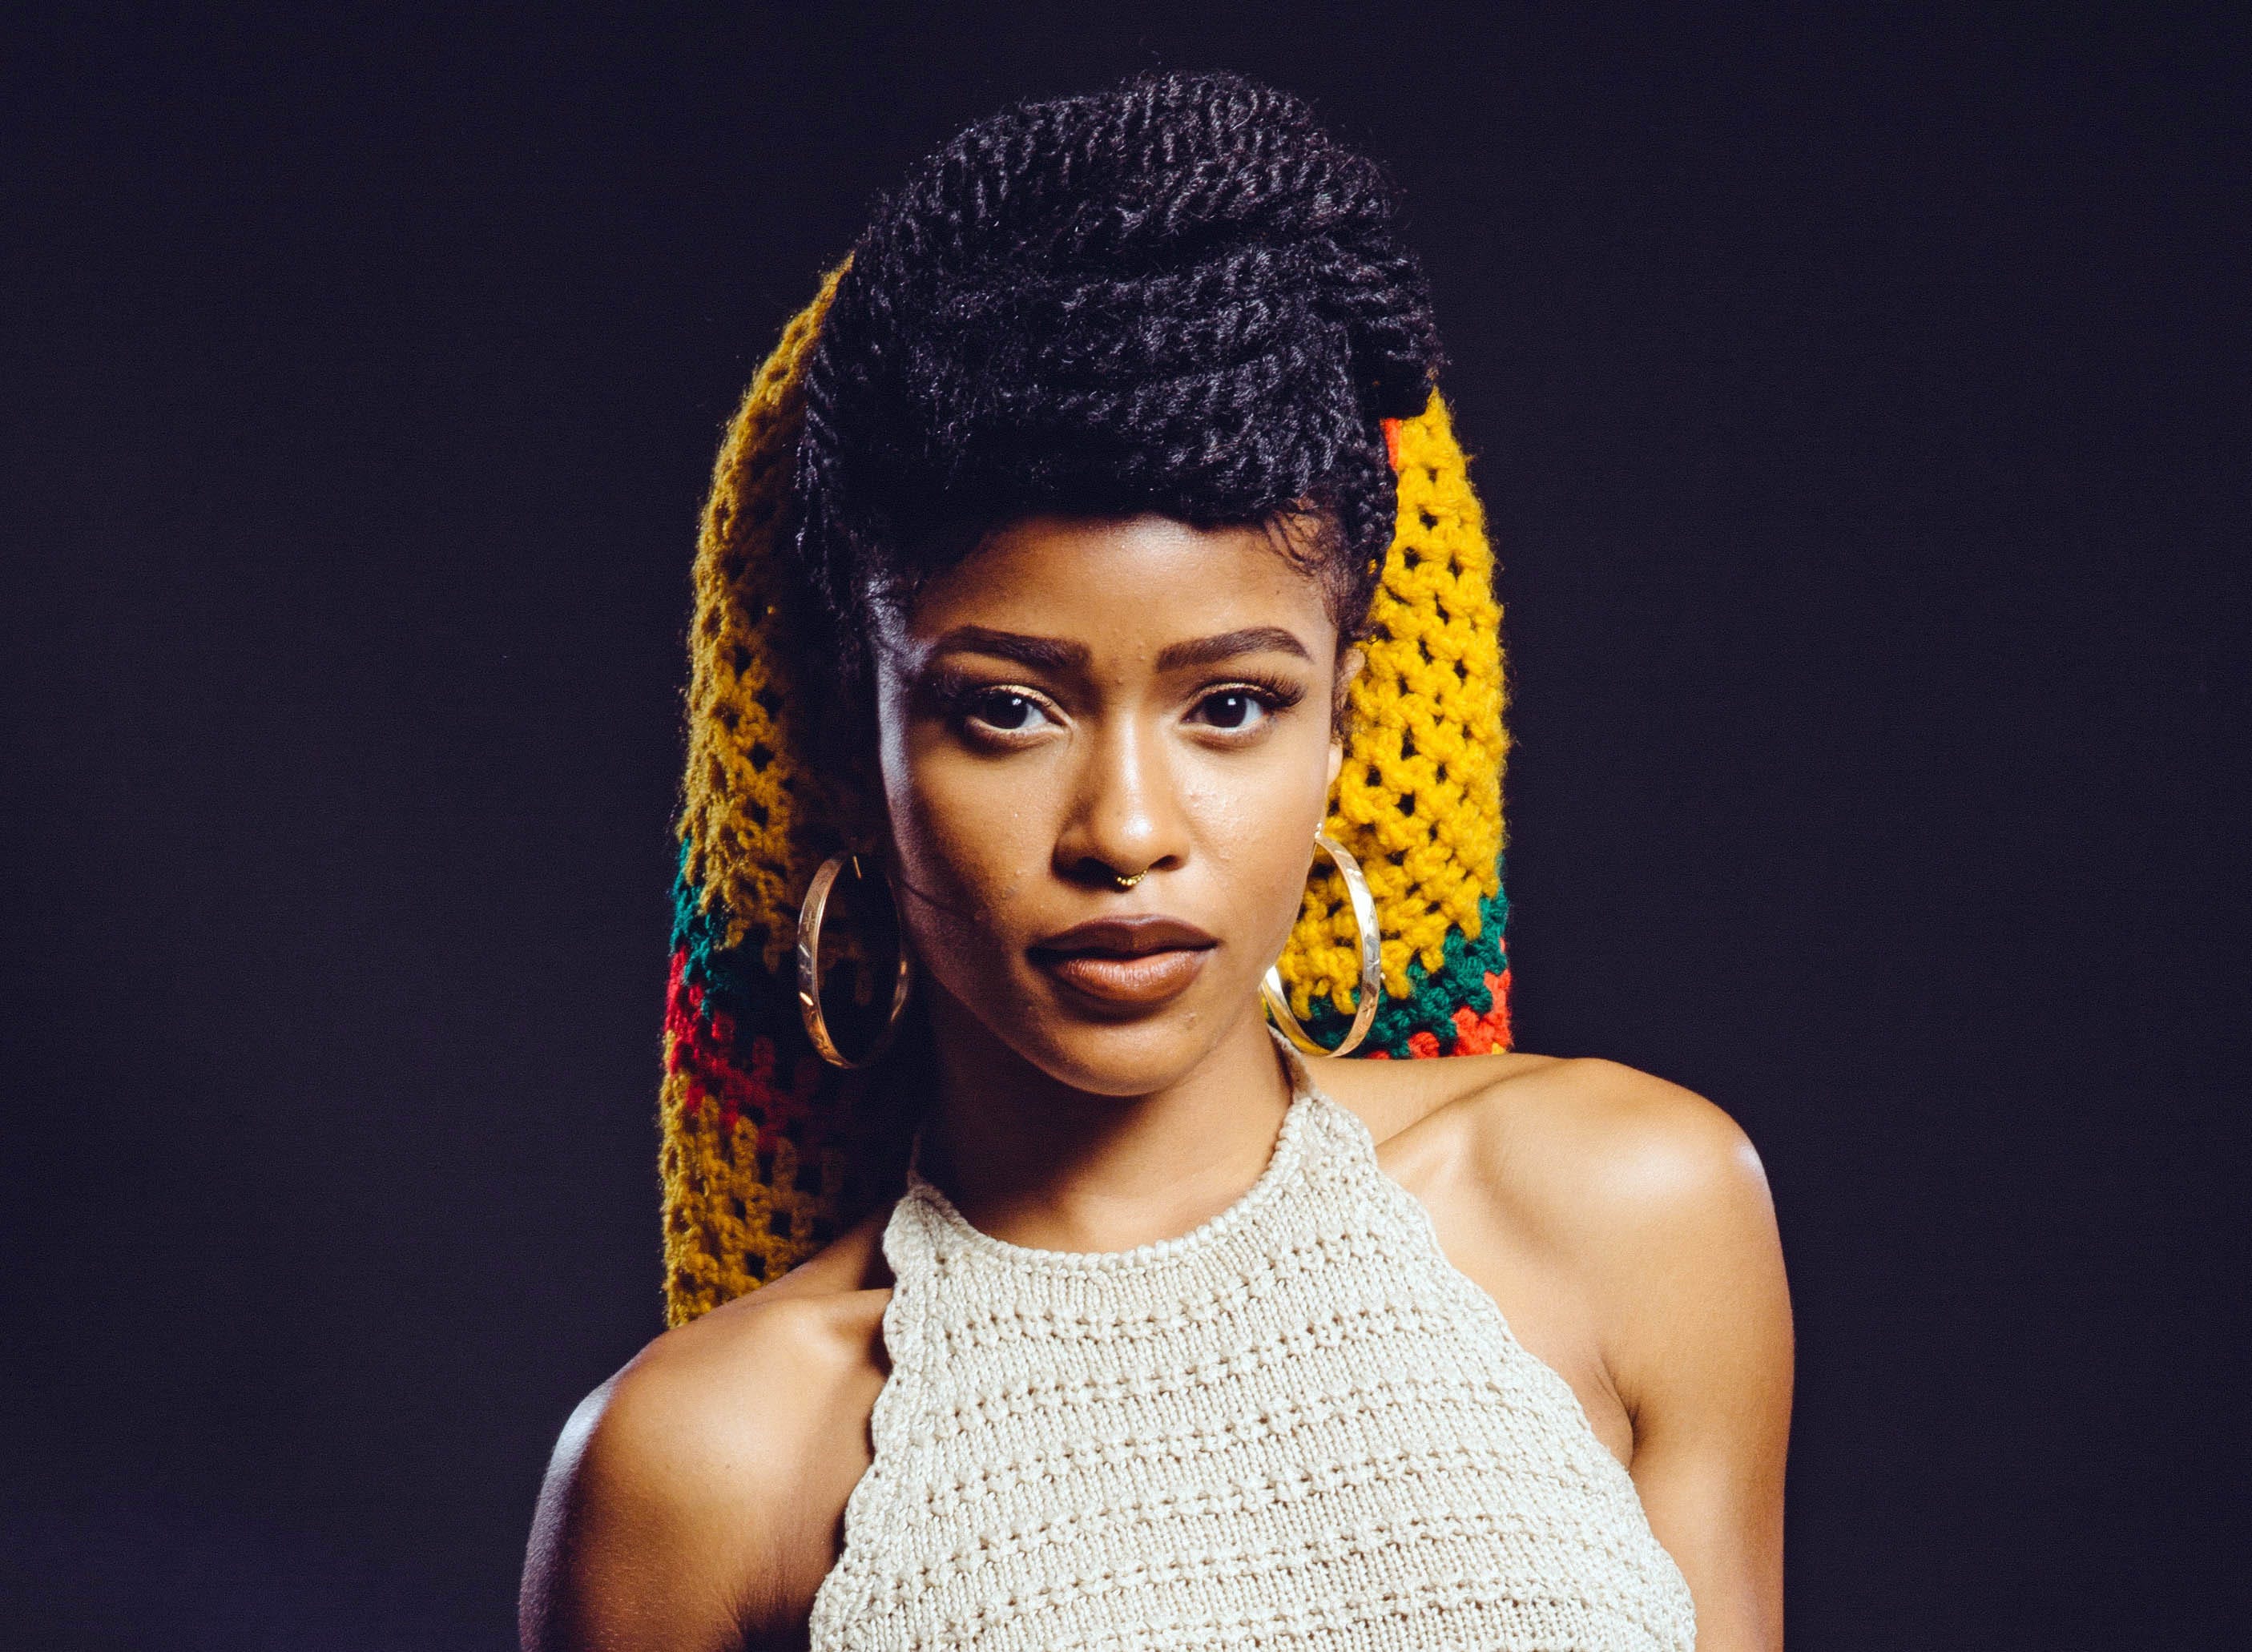 Death of singer Simone Battle is ruled suicide